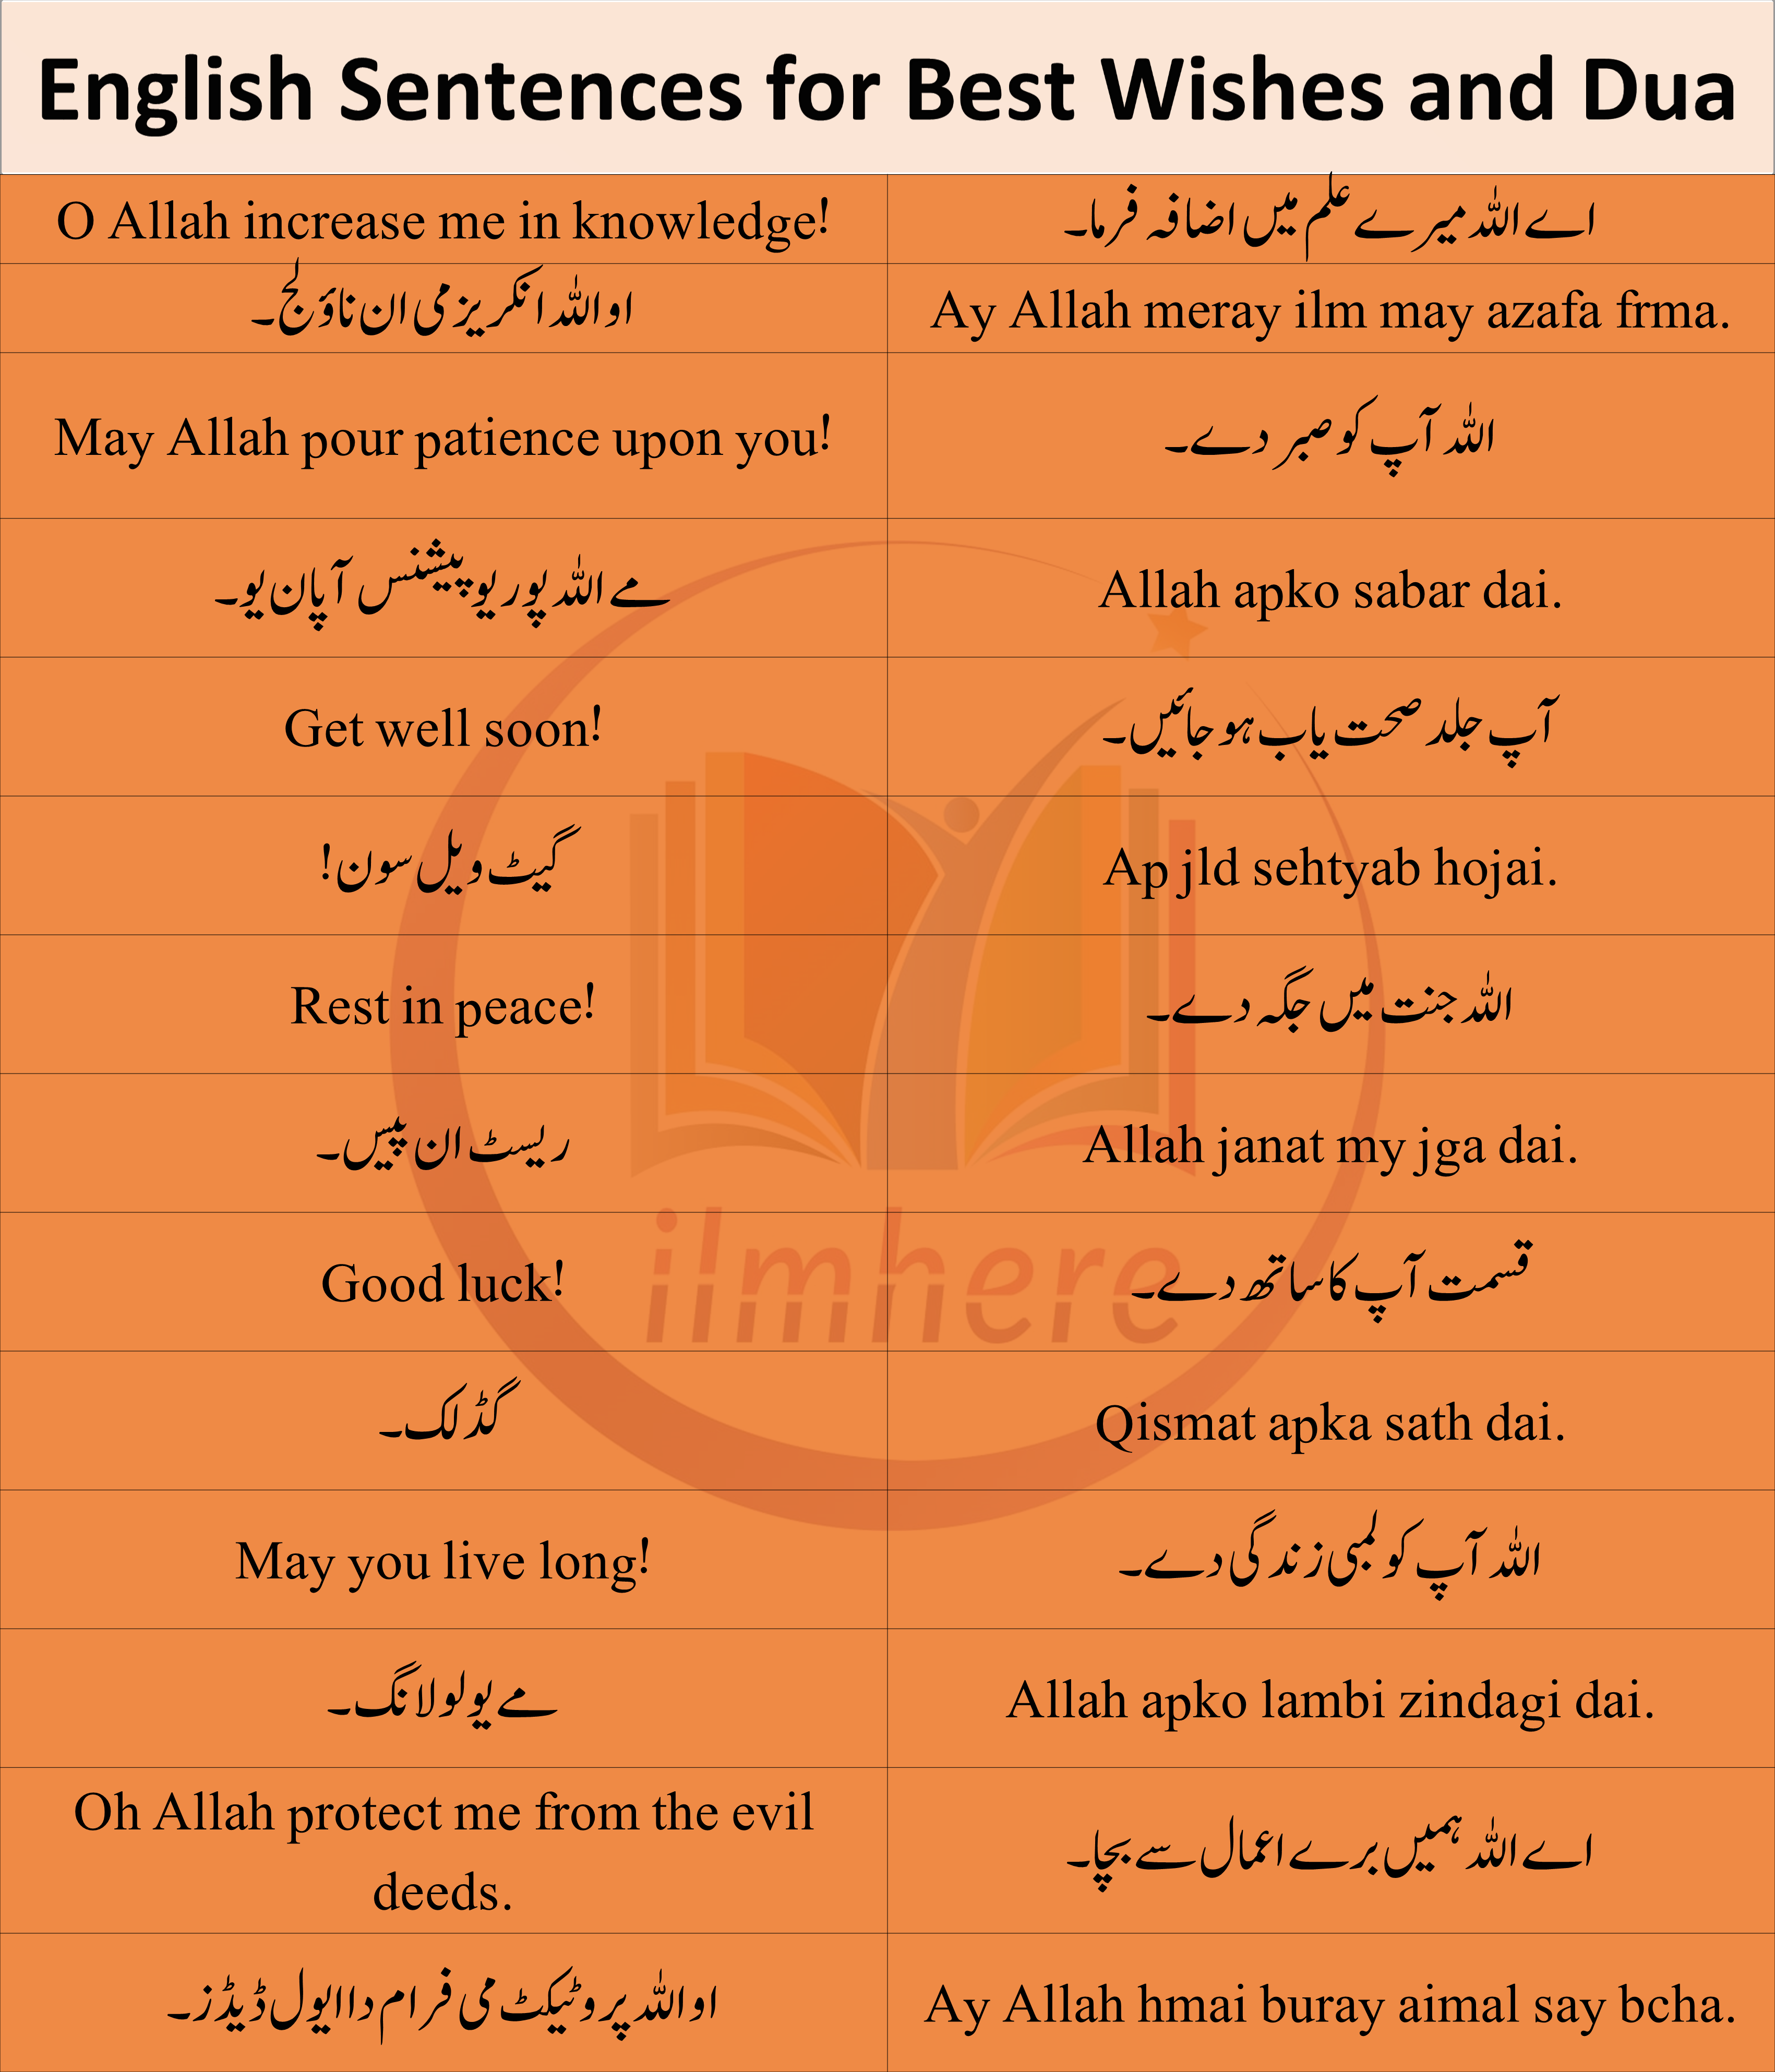 English Sentences for Best Wishes and Dua